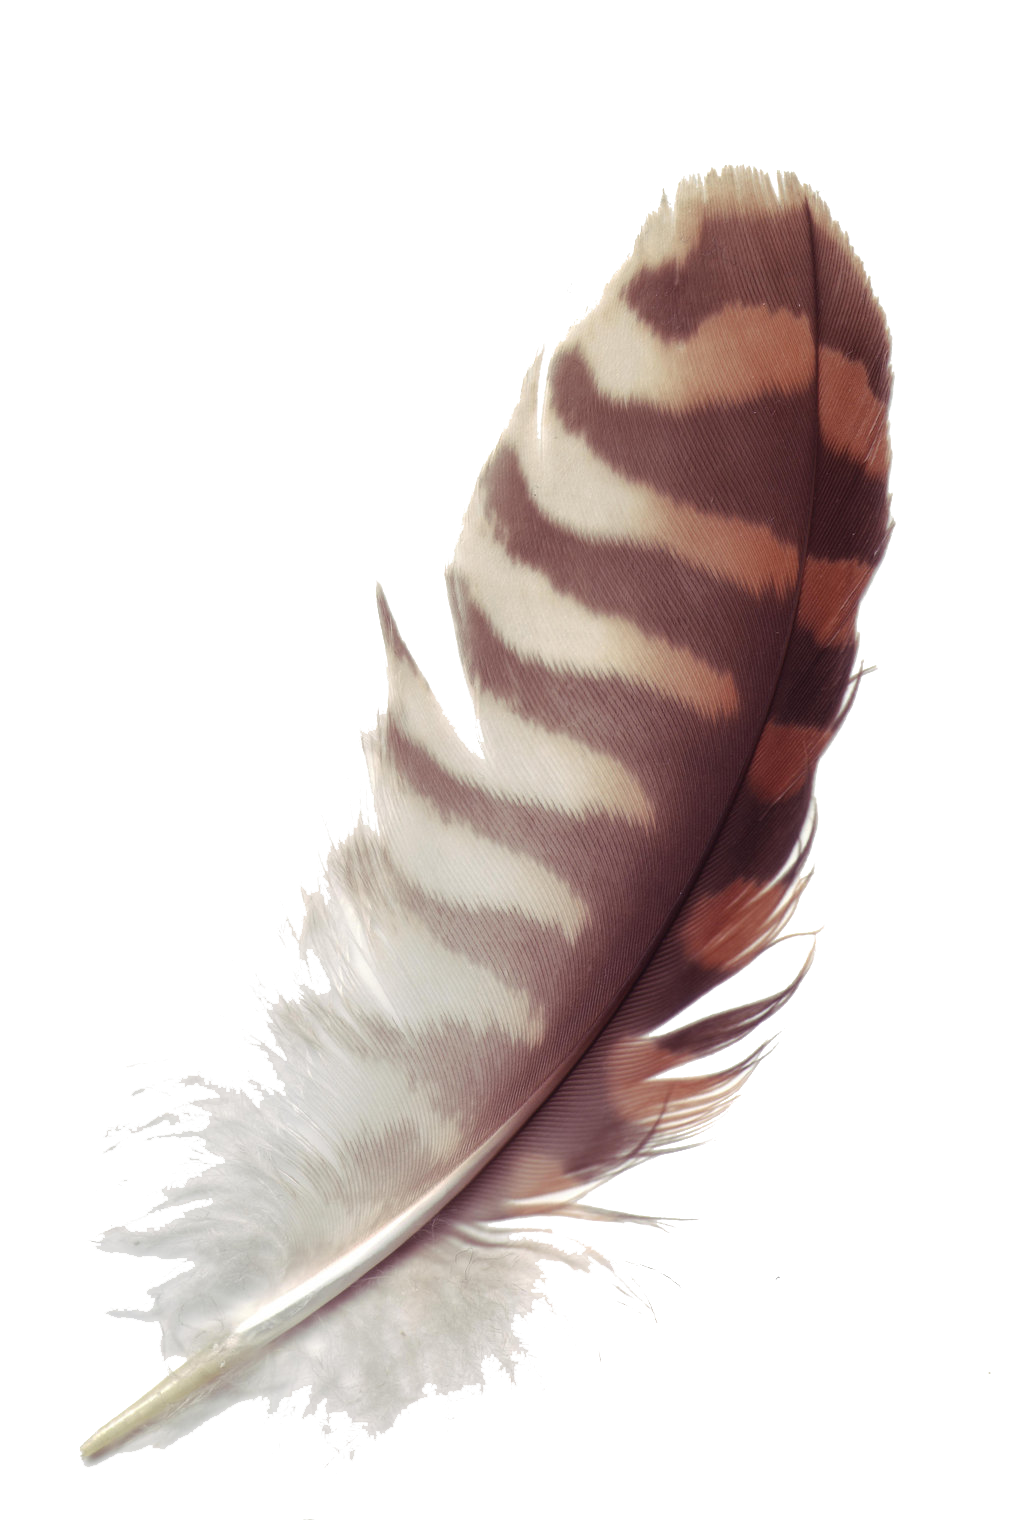 Feather PNG Transparent Images | PNG All